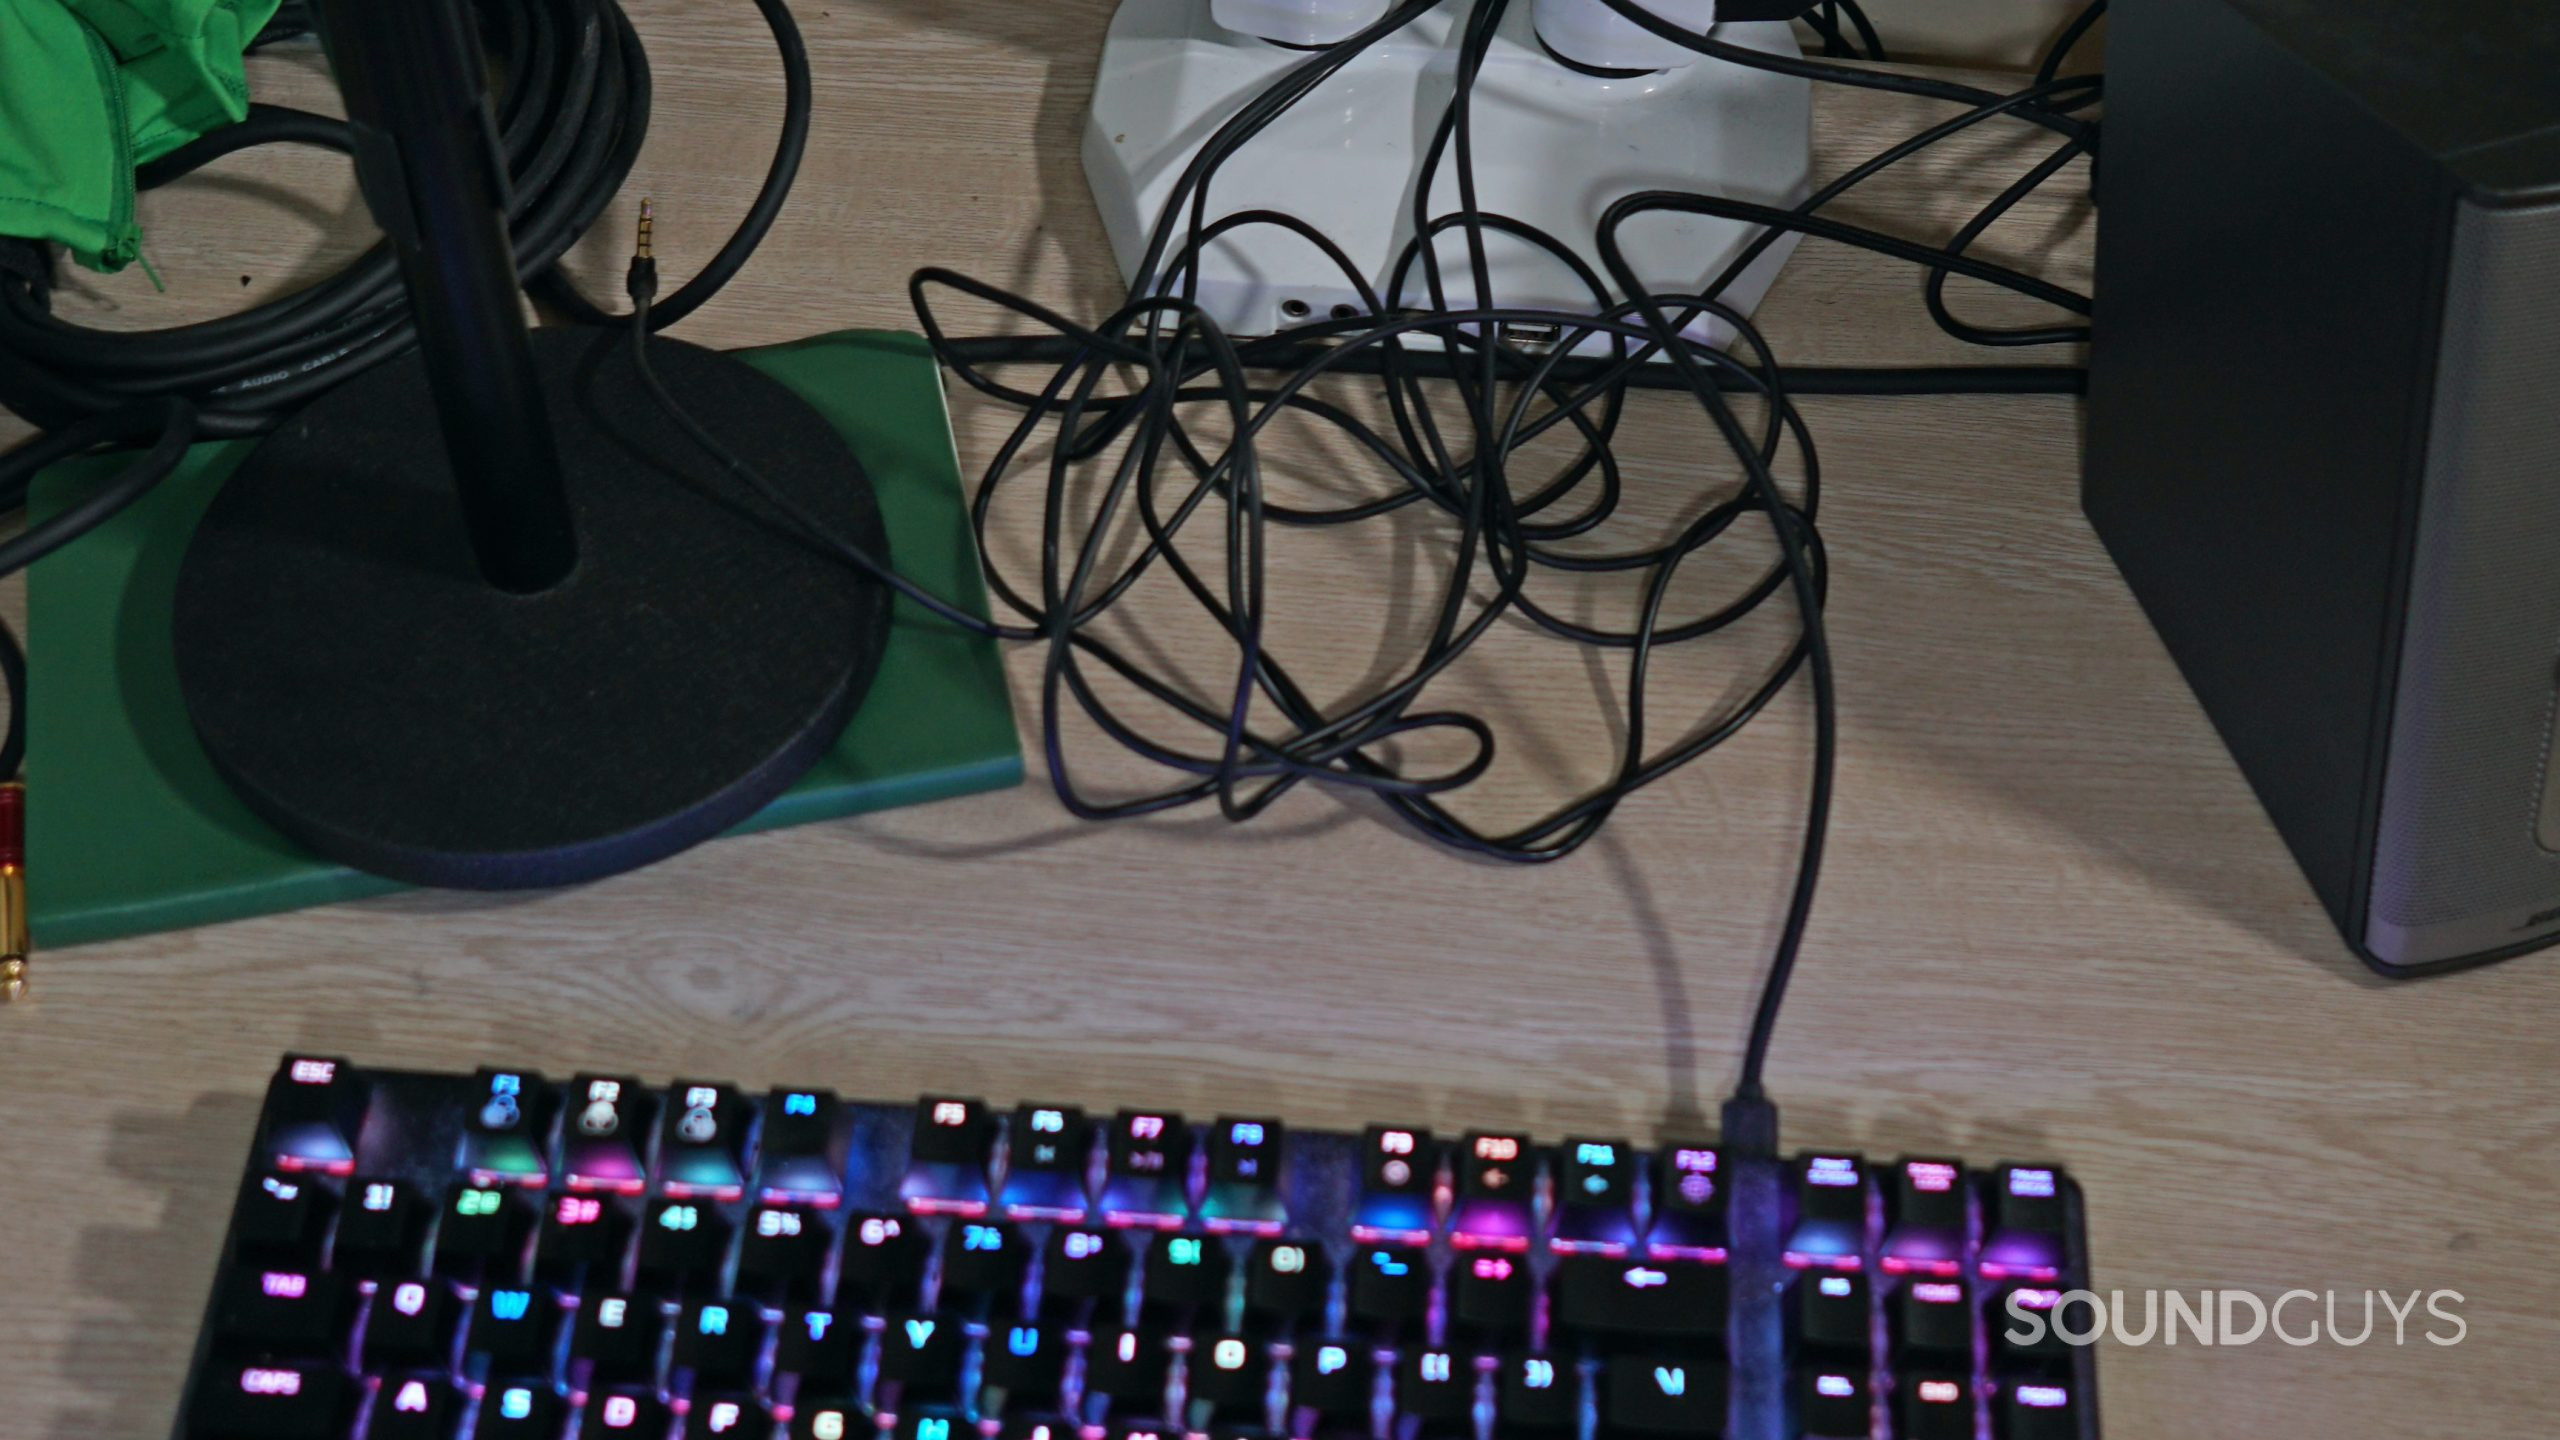 A keyboard and wires tanged up on a wooden desk.